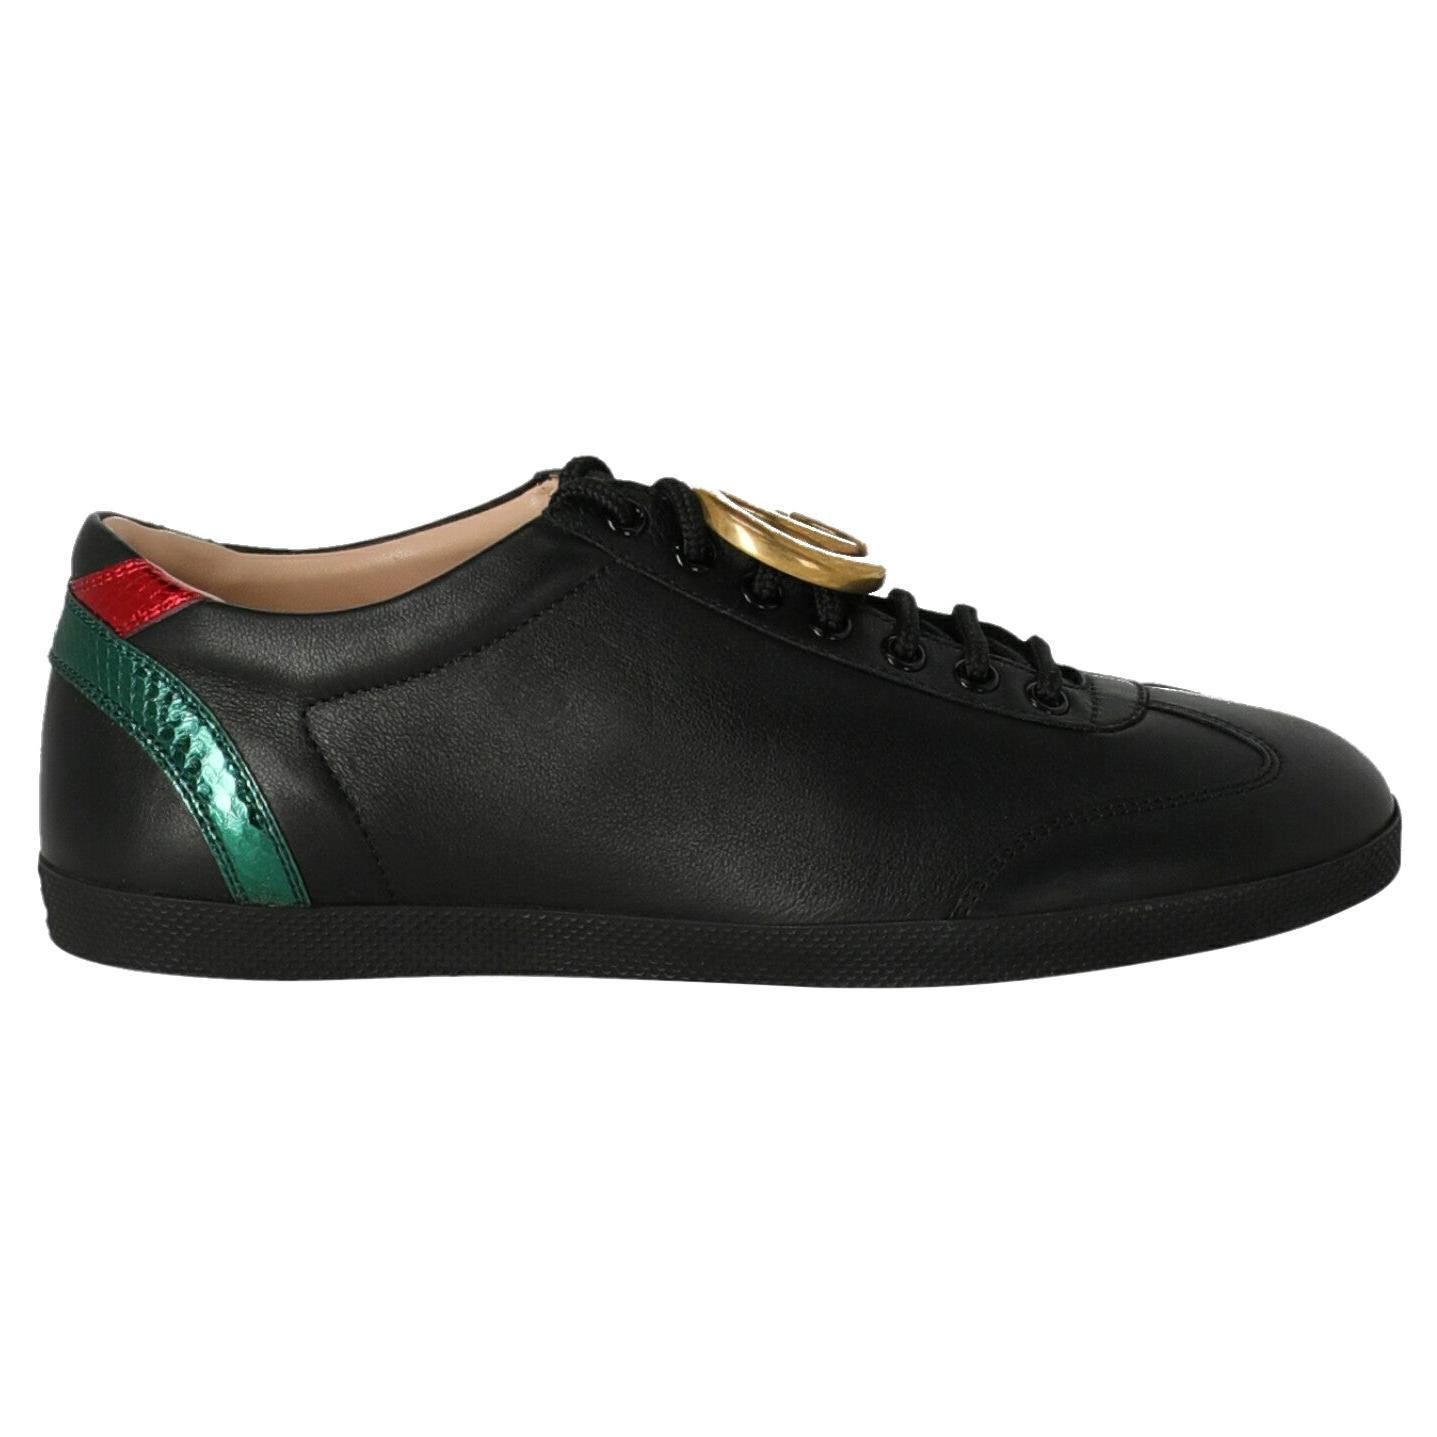 Gucci  Women   Sneakers  Black, Green, Red Leather EU 41.5 For Sale